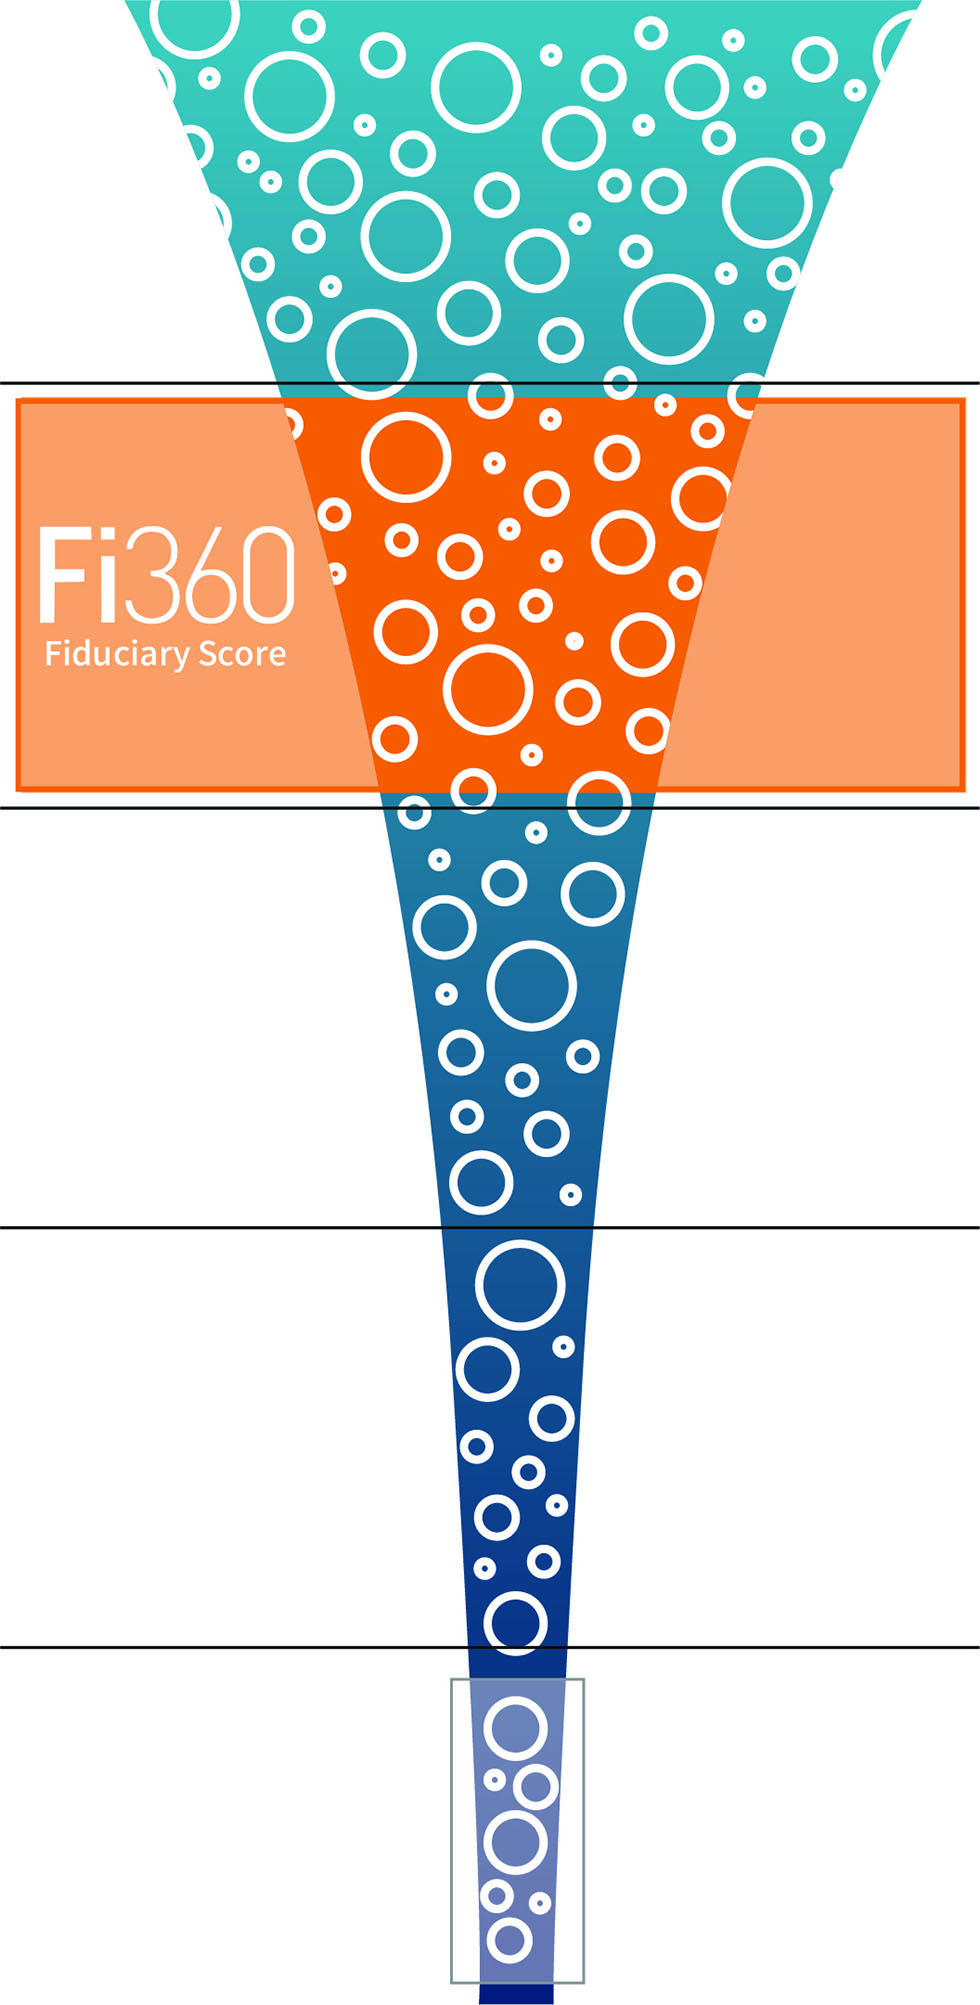 Graphic: A funnel from top to bottom, gradually condenses into a refined selection of options. The funnel progresses through five stages of refinement. The second stage is highlighted and labeled "Fi360 Fiduciary Score."